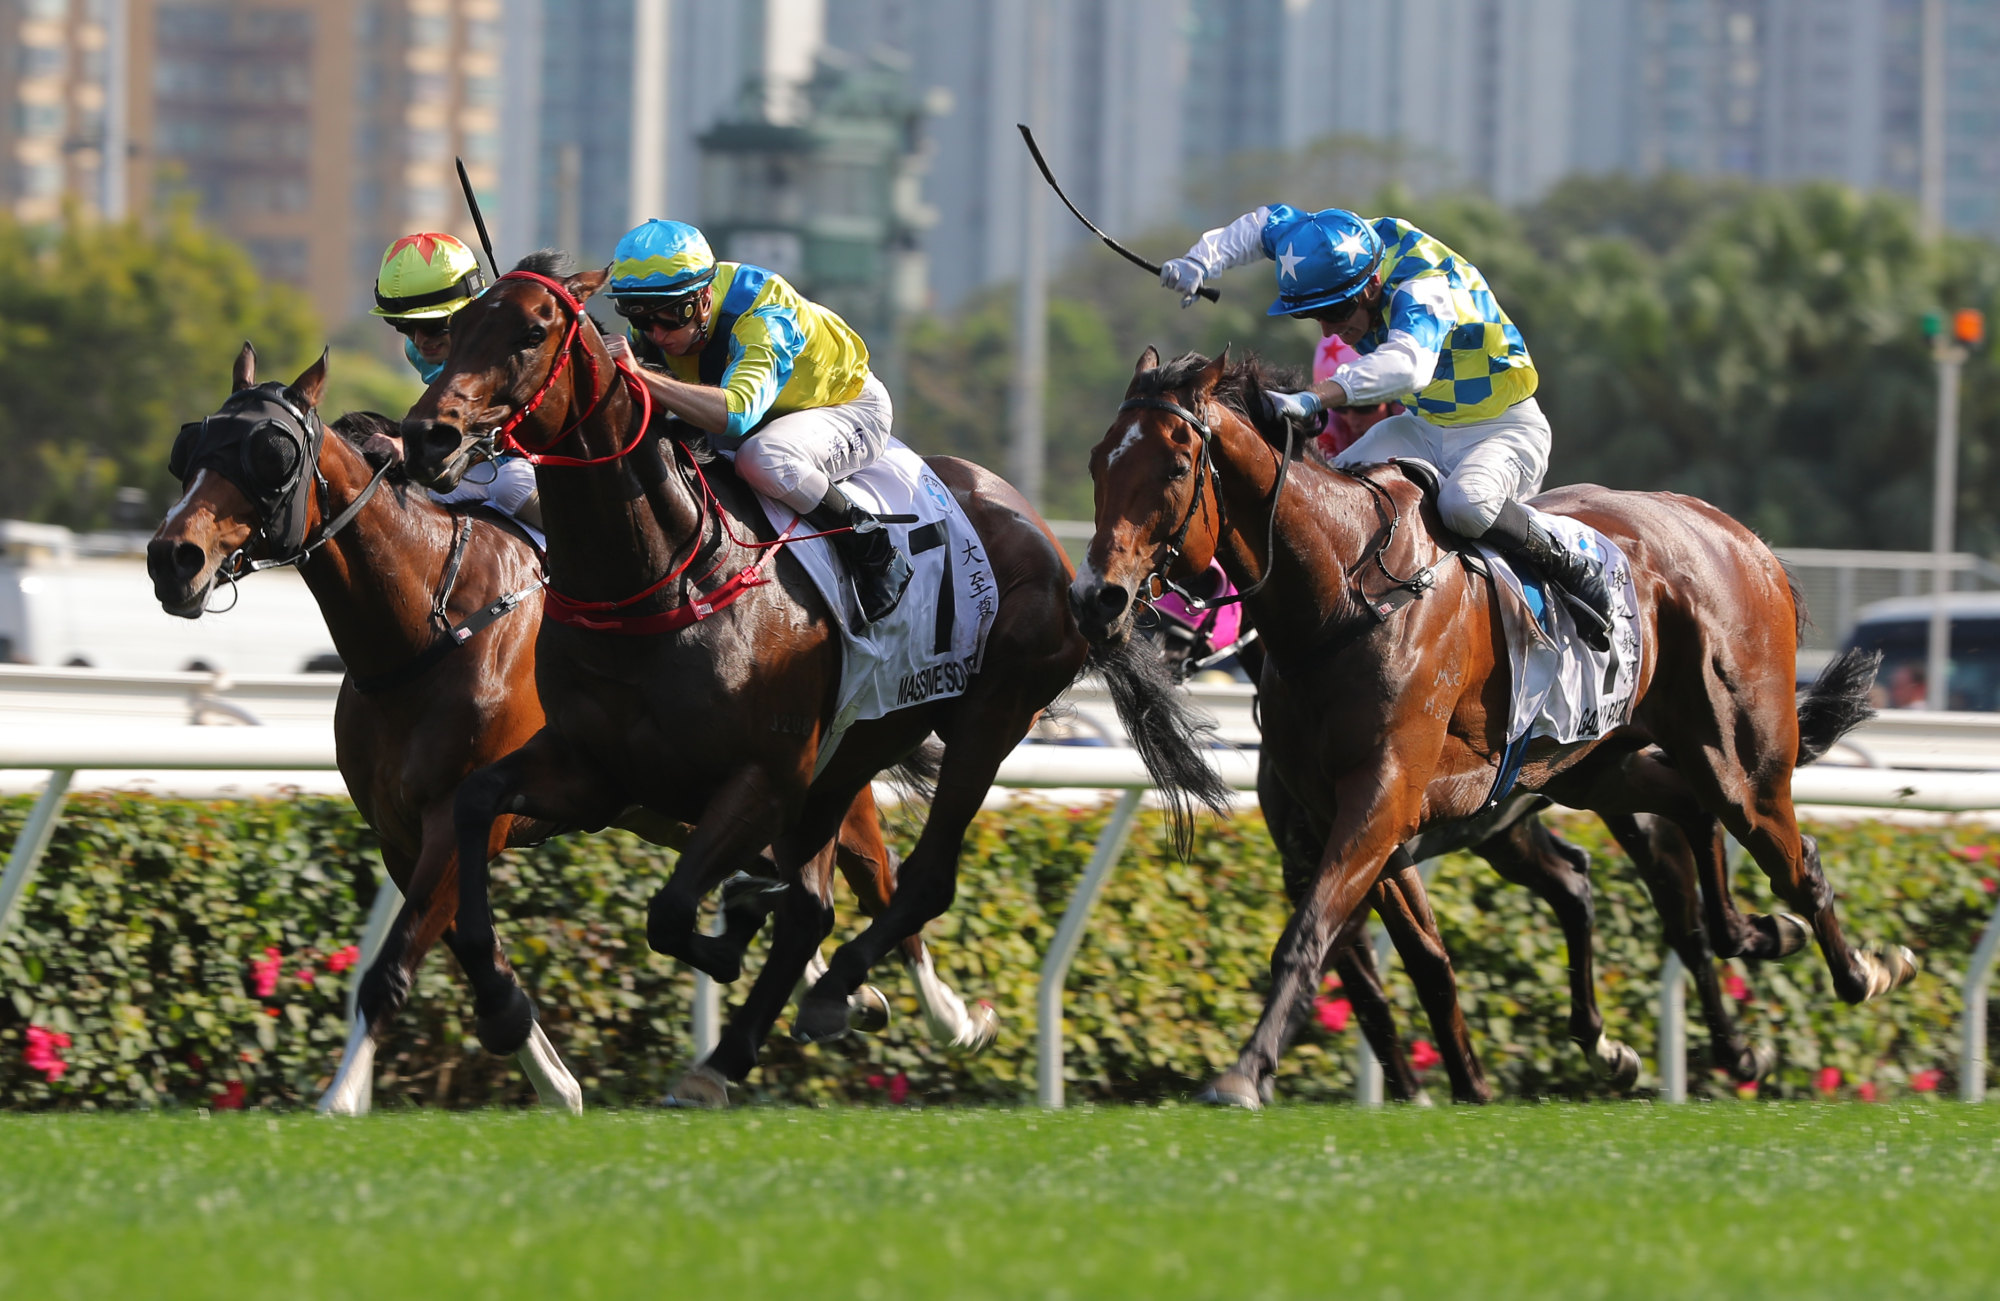 Galaxy Patch (right) finishes second in the Hong Kong Derby (2,000m) under Blake Shinn.